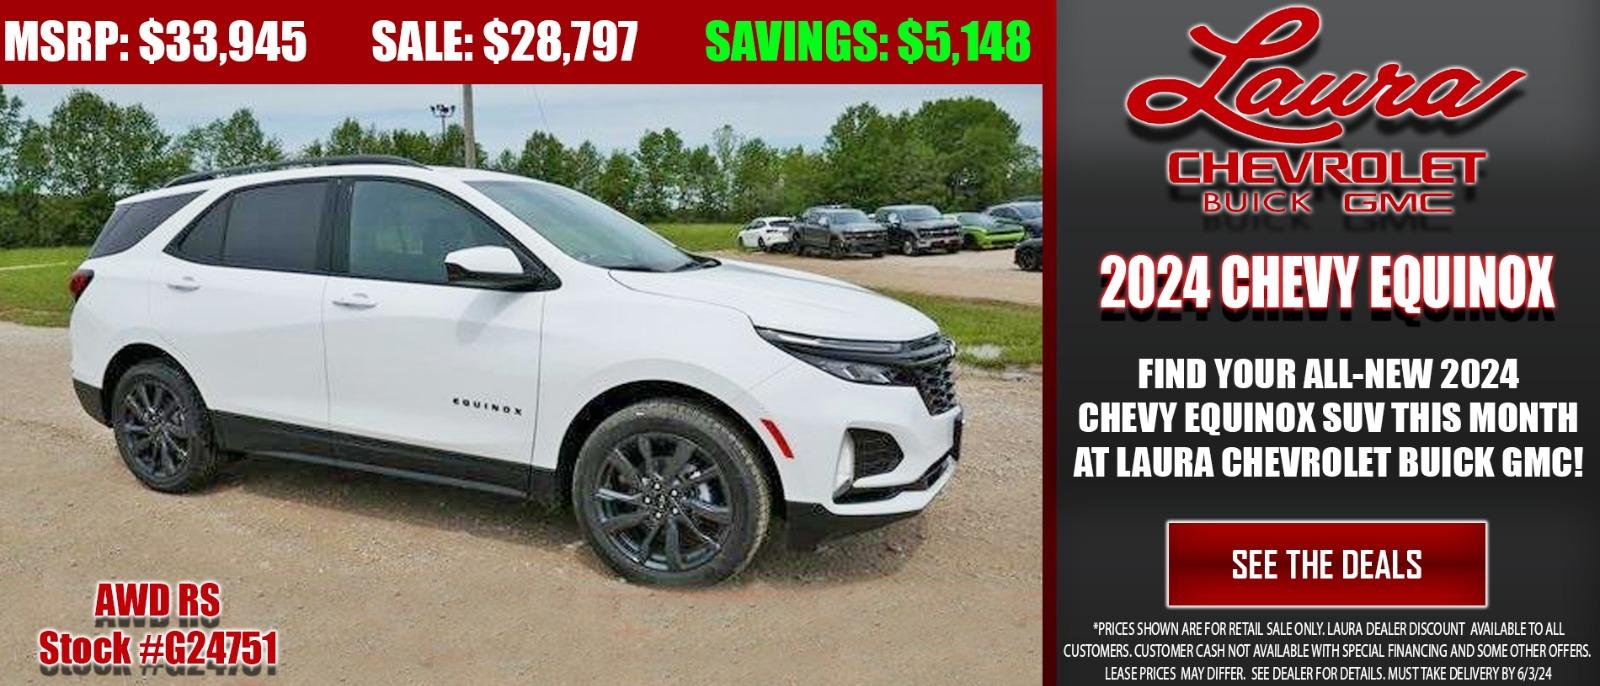 Find your new 2024 Chevy Equinox SUV at the best price this month at Laura Chevrolet Buick GMC